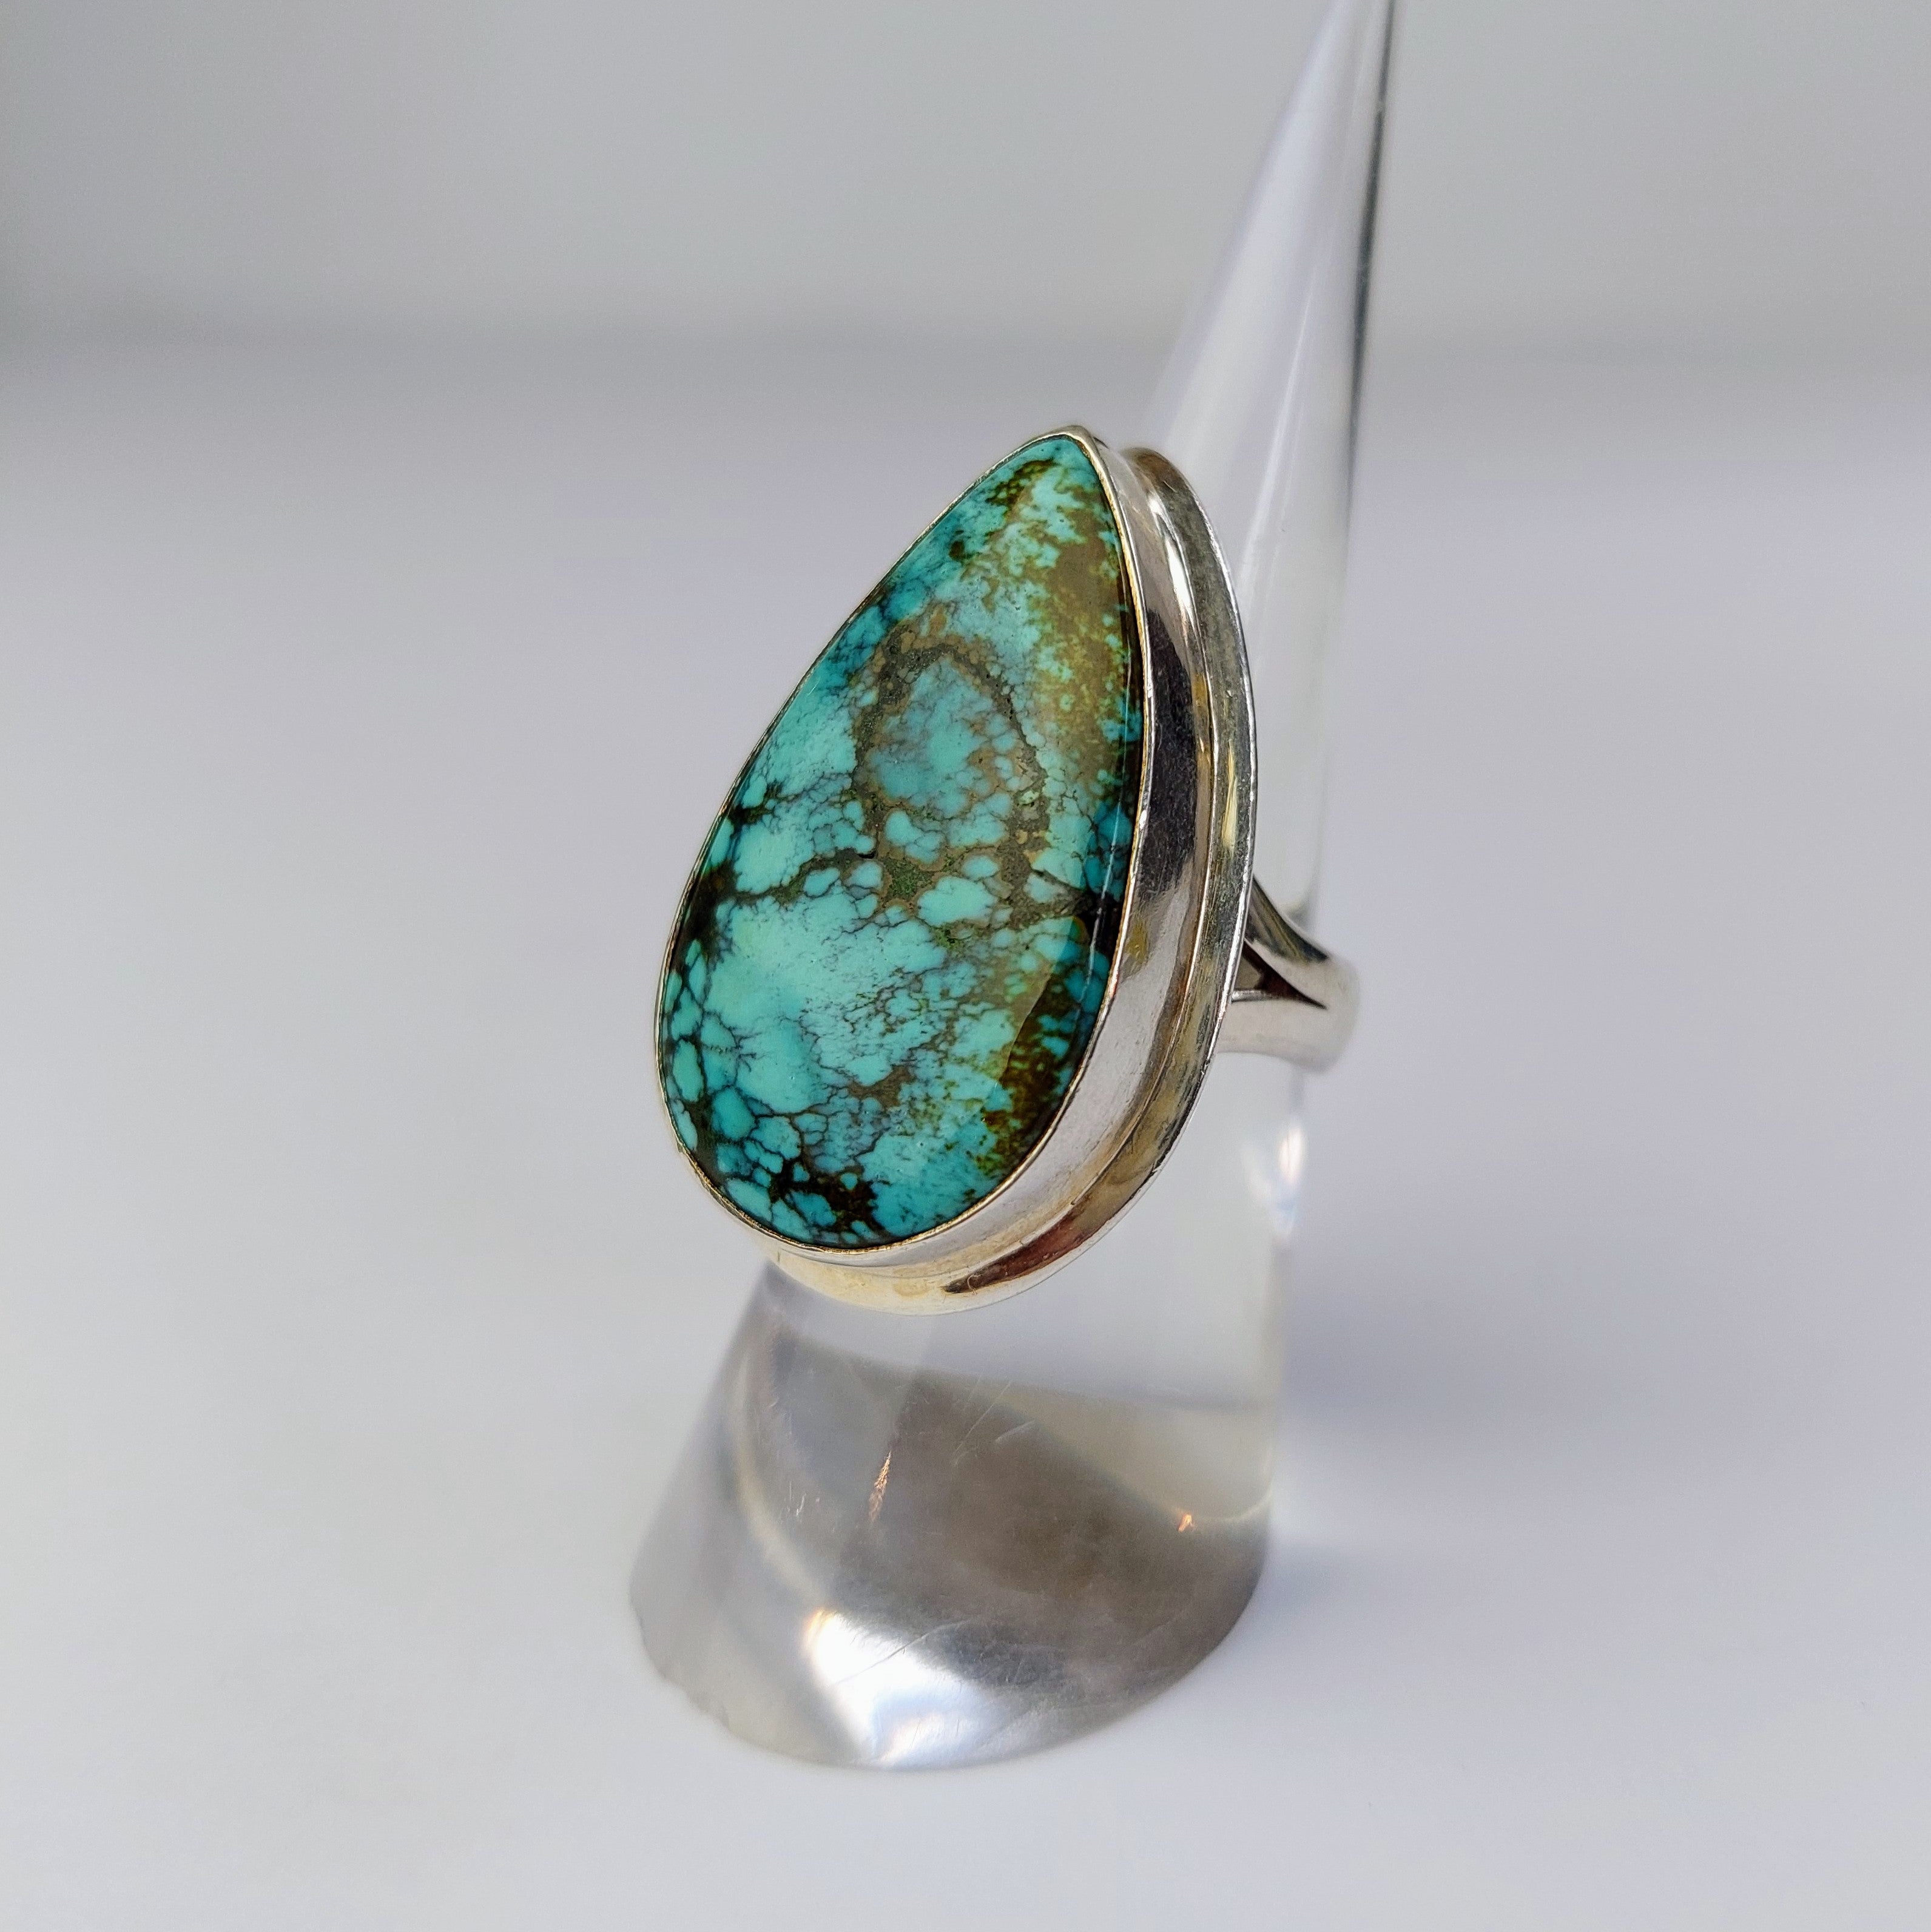 Large Turquoise Ring - The Nancy Smillie Shop - Art, Jewellery & Designer Gifts Glasgow